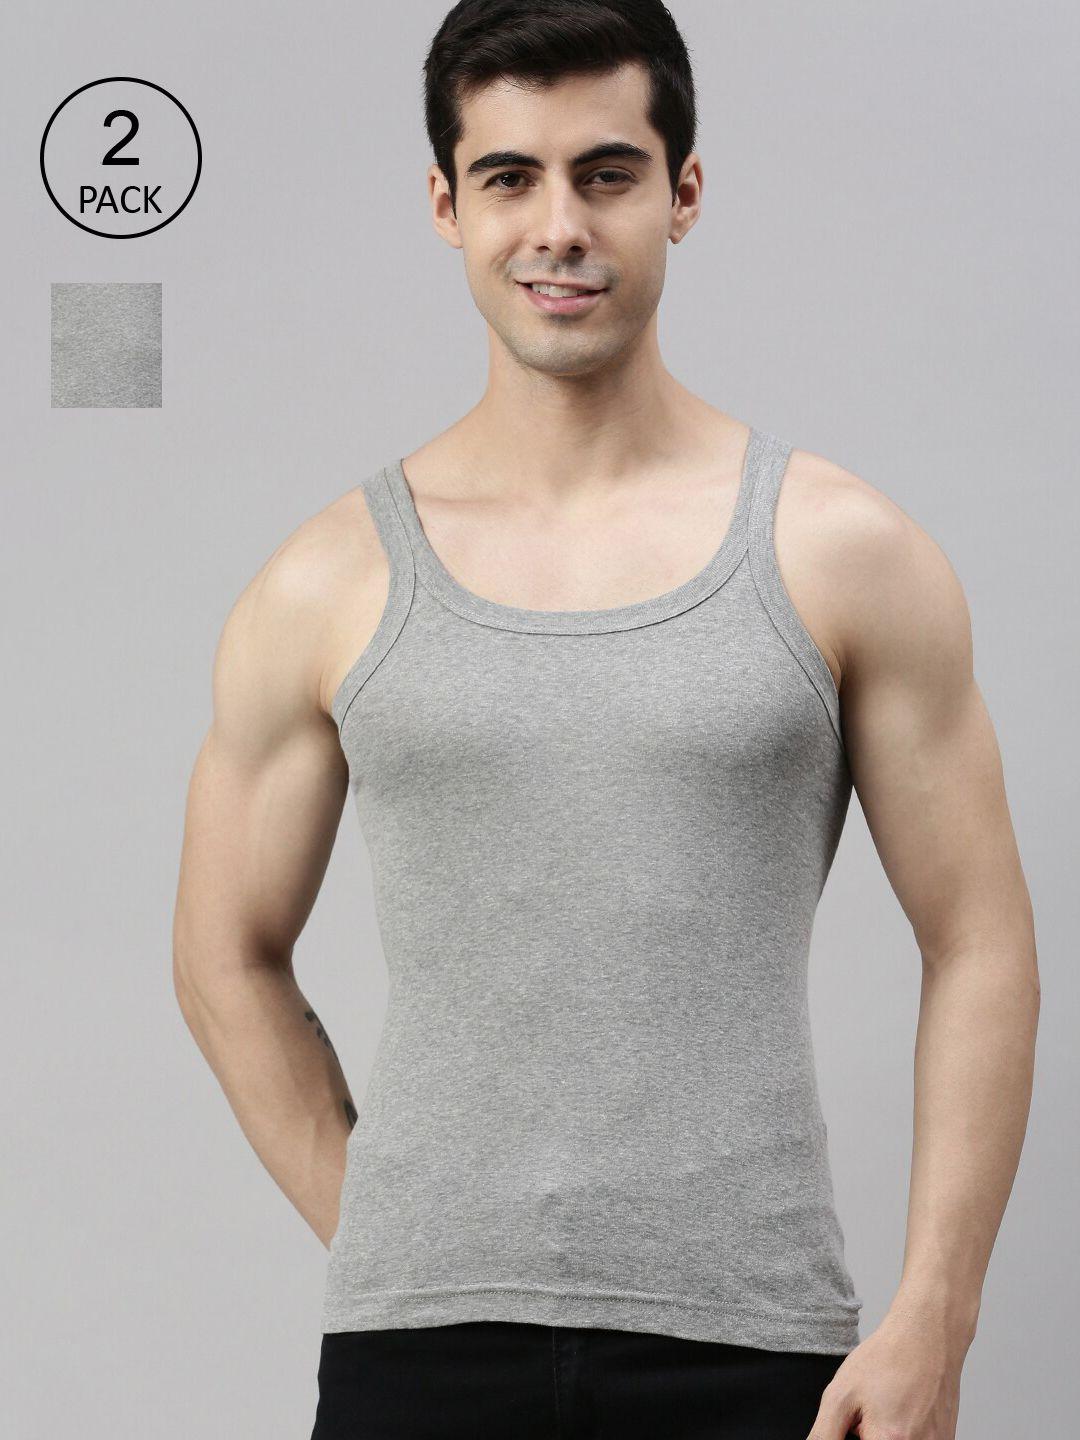 lux cozi men pack of 2 grey solid pure cotton anti-odour innerwear gym vests